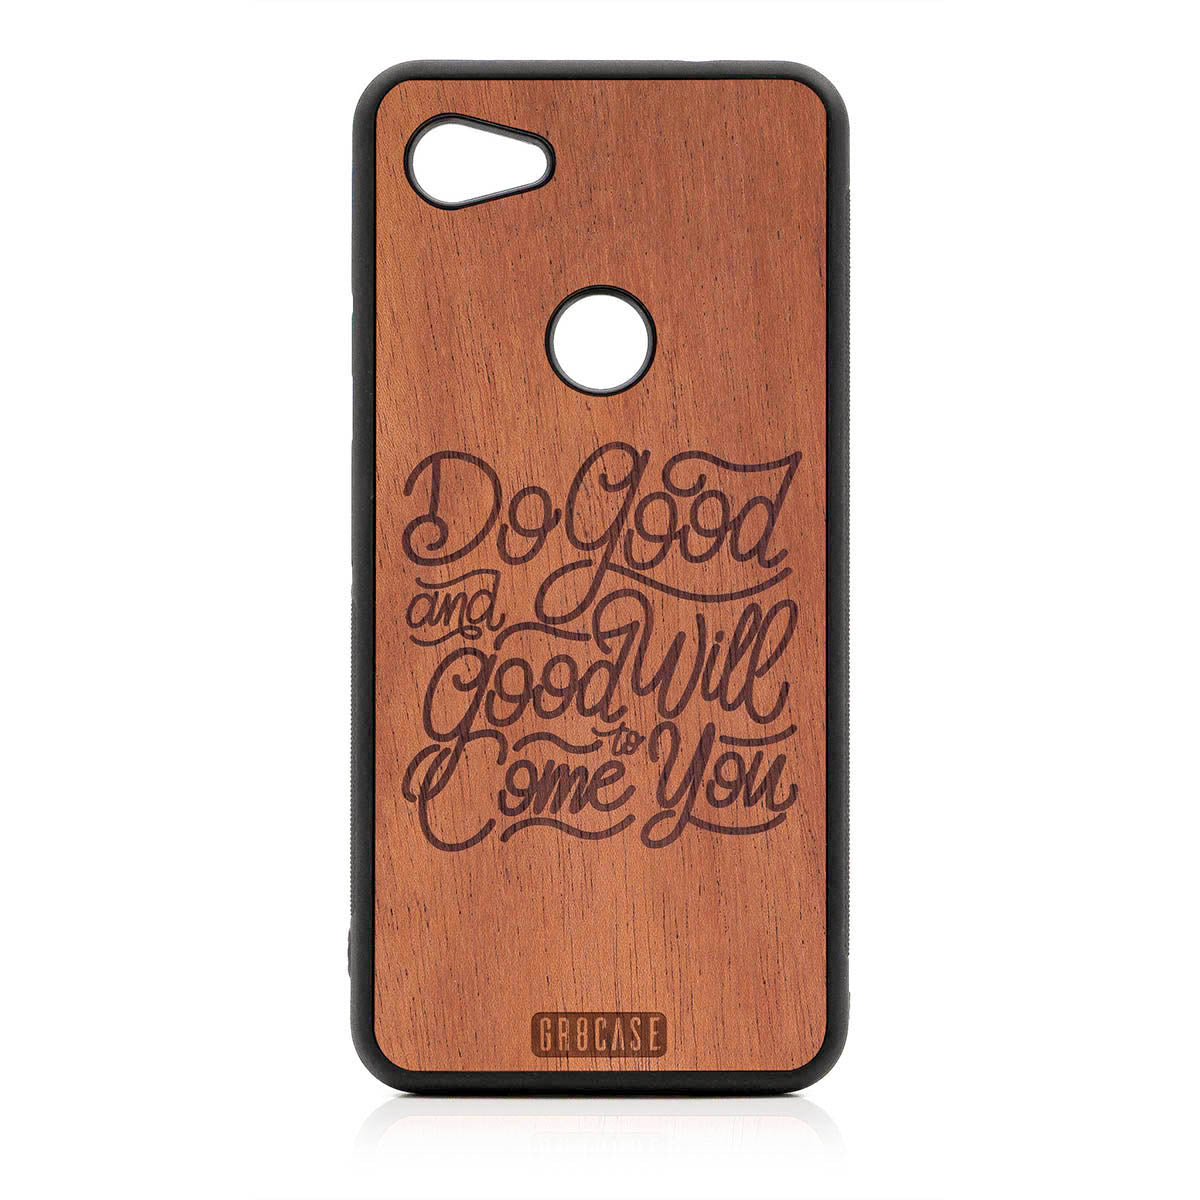 Do Good And Good Will Come To You Design Wood Case For Google Pixel 3A by GR8CASE